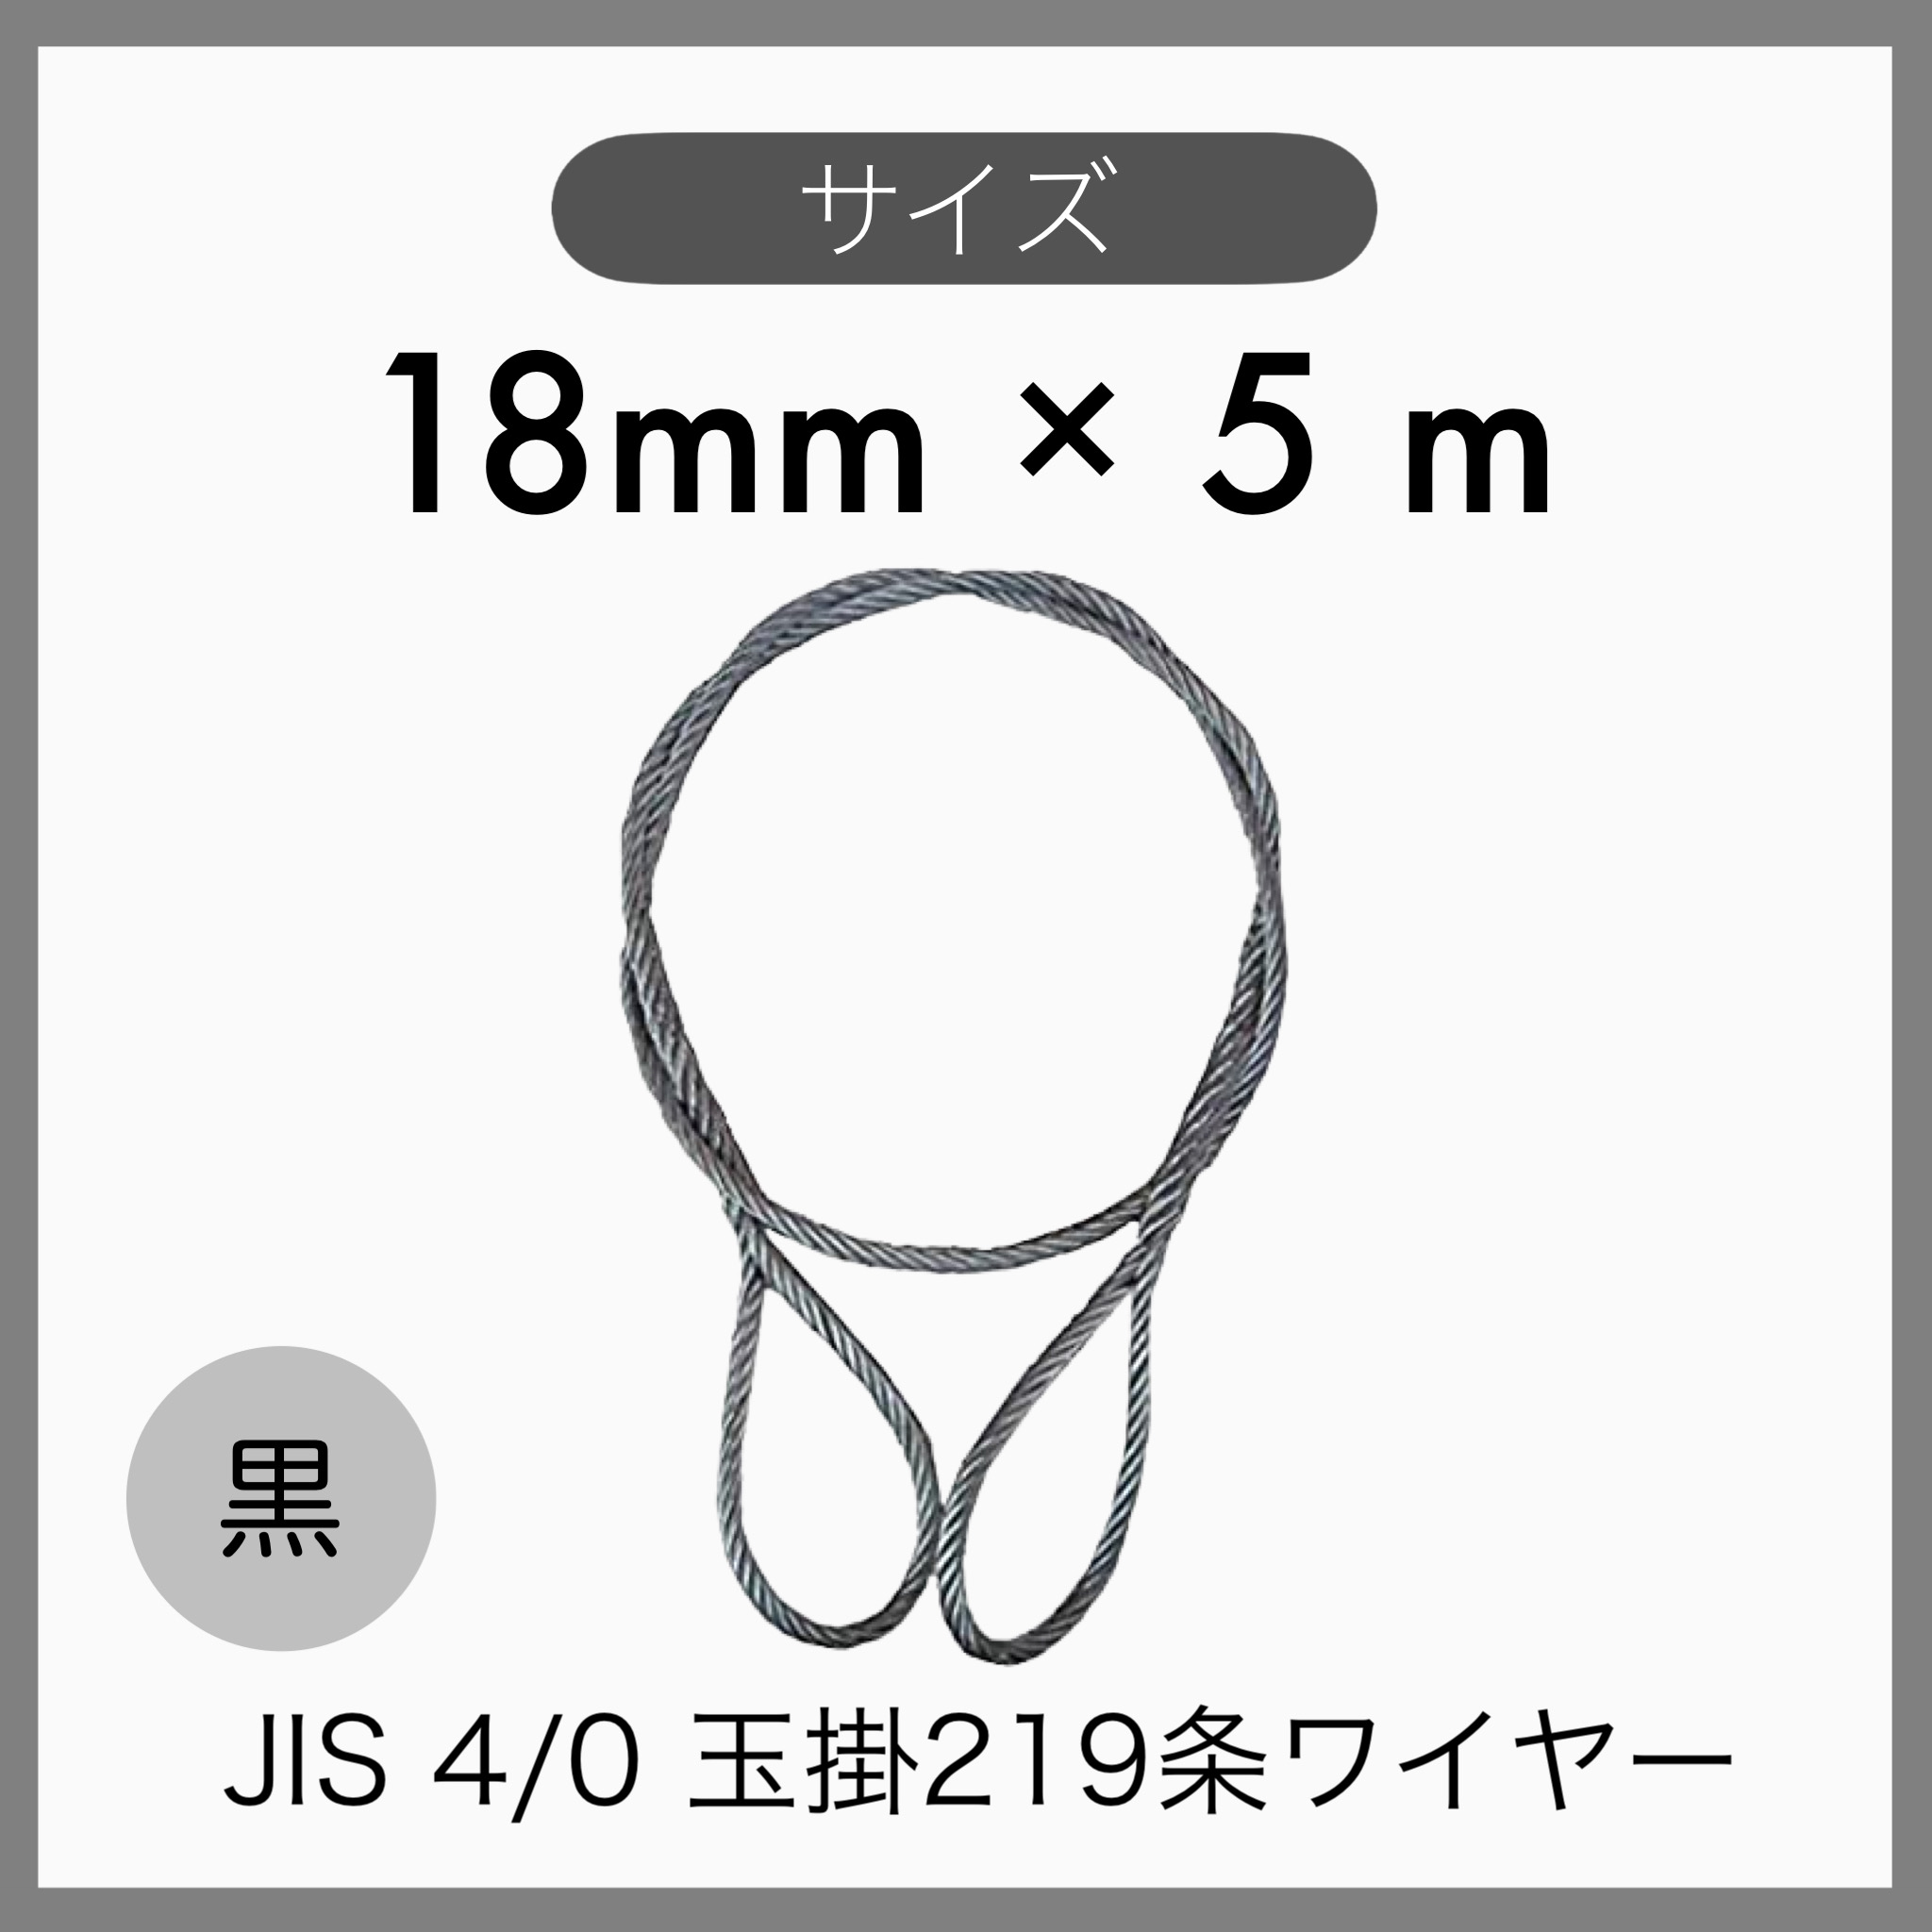 5 pcs set JIS O/O black sphere .. wire sphere ..219 article wire knitting imported goods 18mm×5m